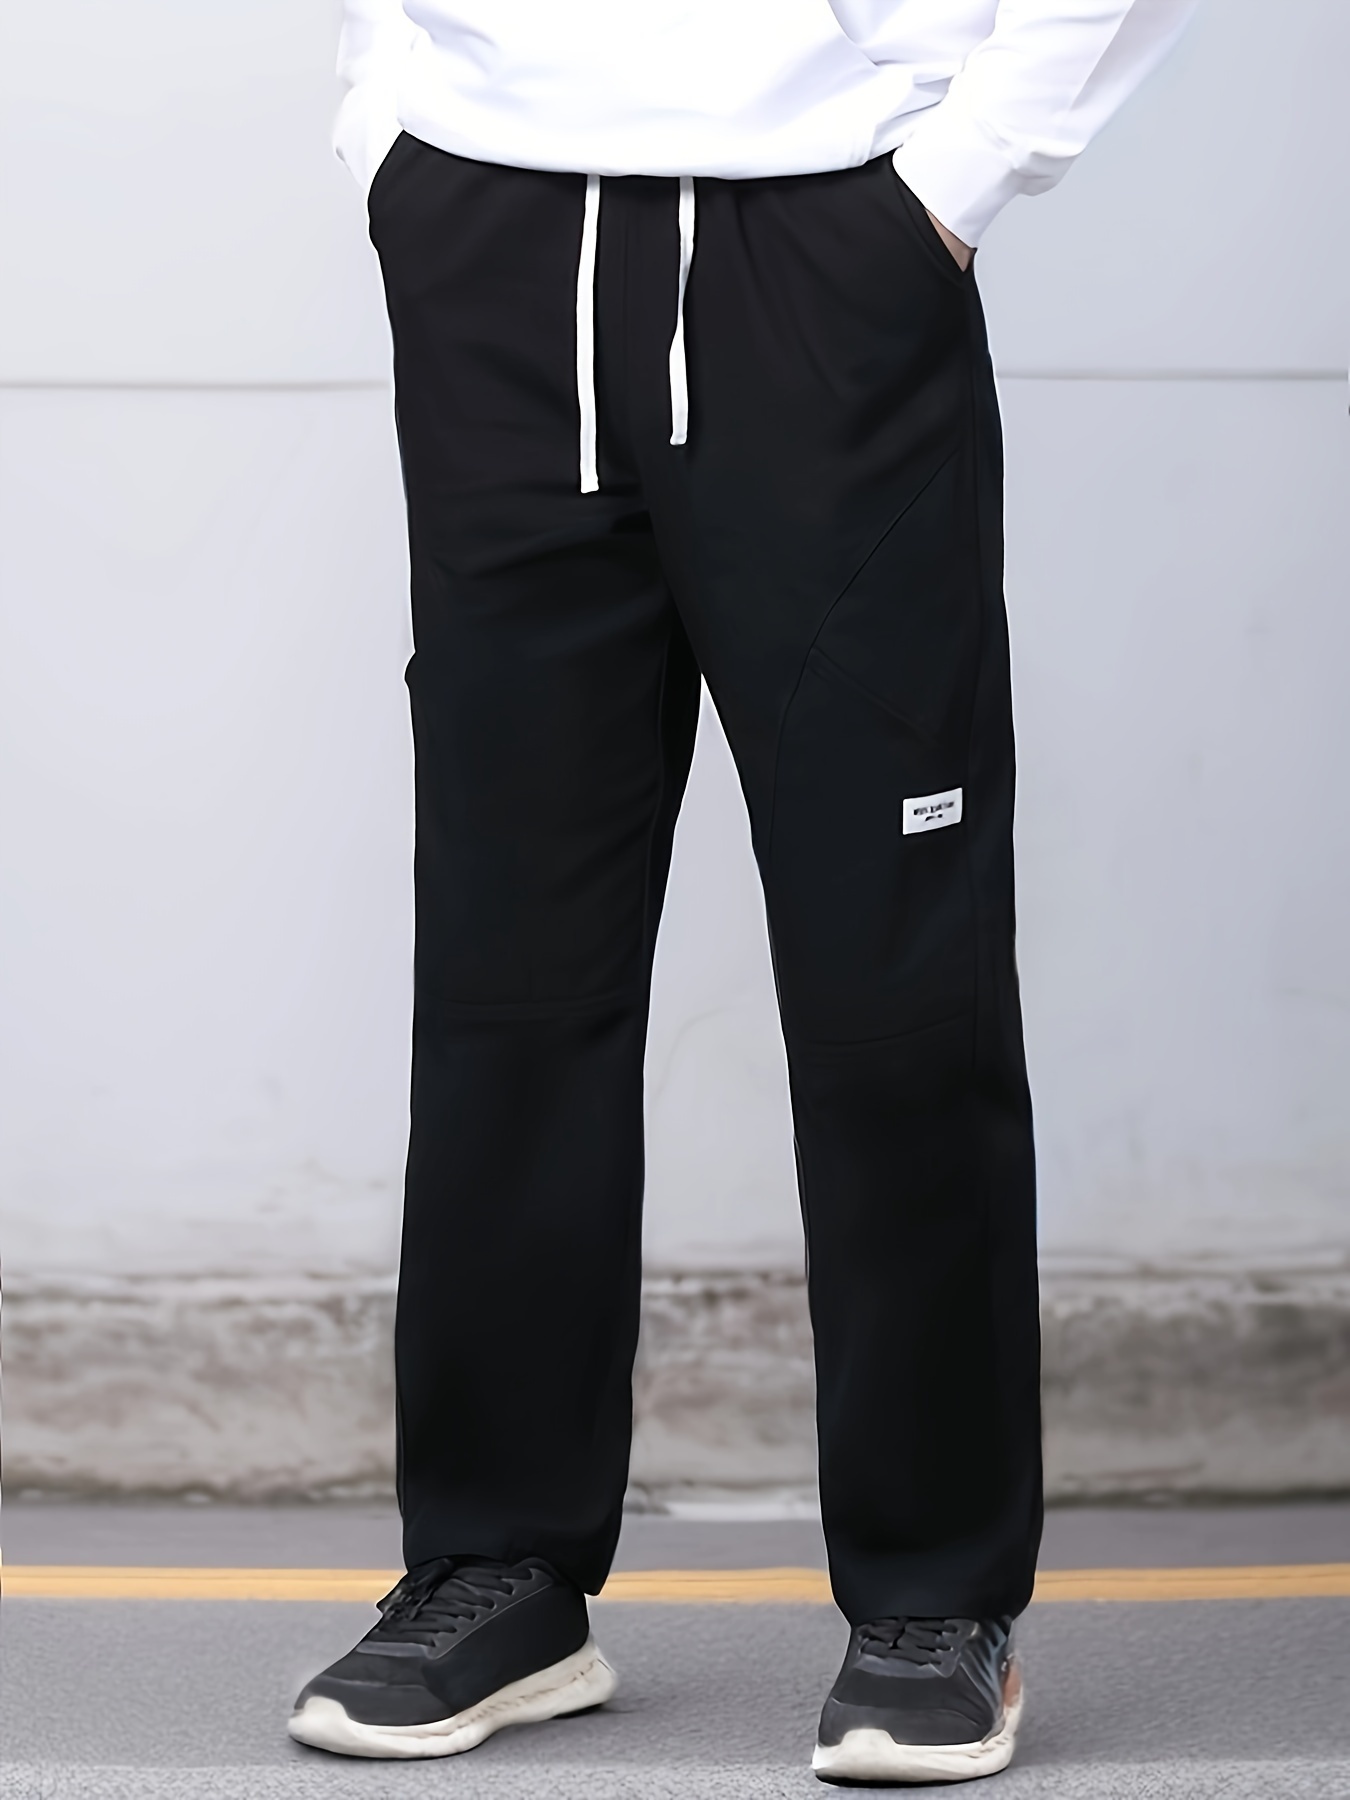 2-in-1 Double Layer Pants Activewear, Men's Sports Trousers For Summer Gym  Workout Training